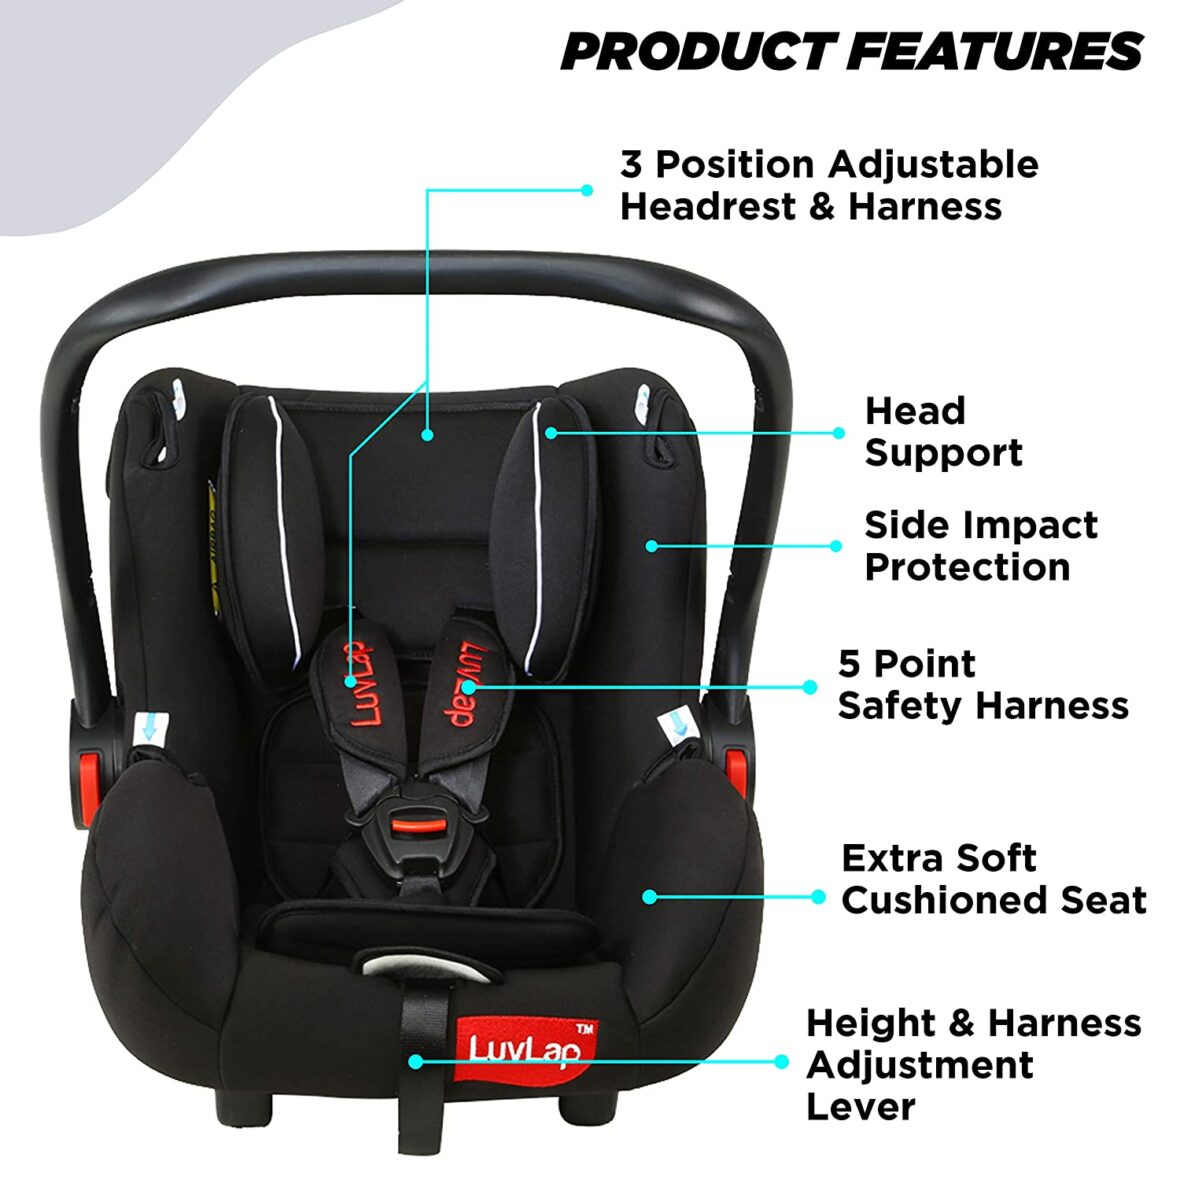 LuvLap Multipurpose 4 in 1 Baby Carry Cot Cum Infant Car Seat, Rocker, Chair, 0 Month+, Carrying Capacity 13Kg, 5 Point Safety Harness, ECER44/04 Safety Standard Certified, Extendable Canopy (Black)